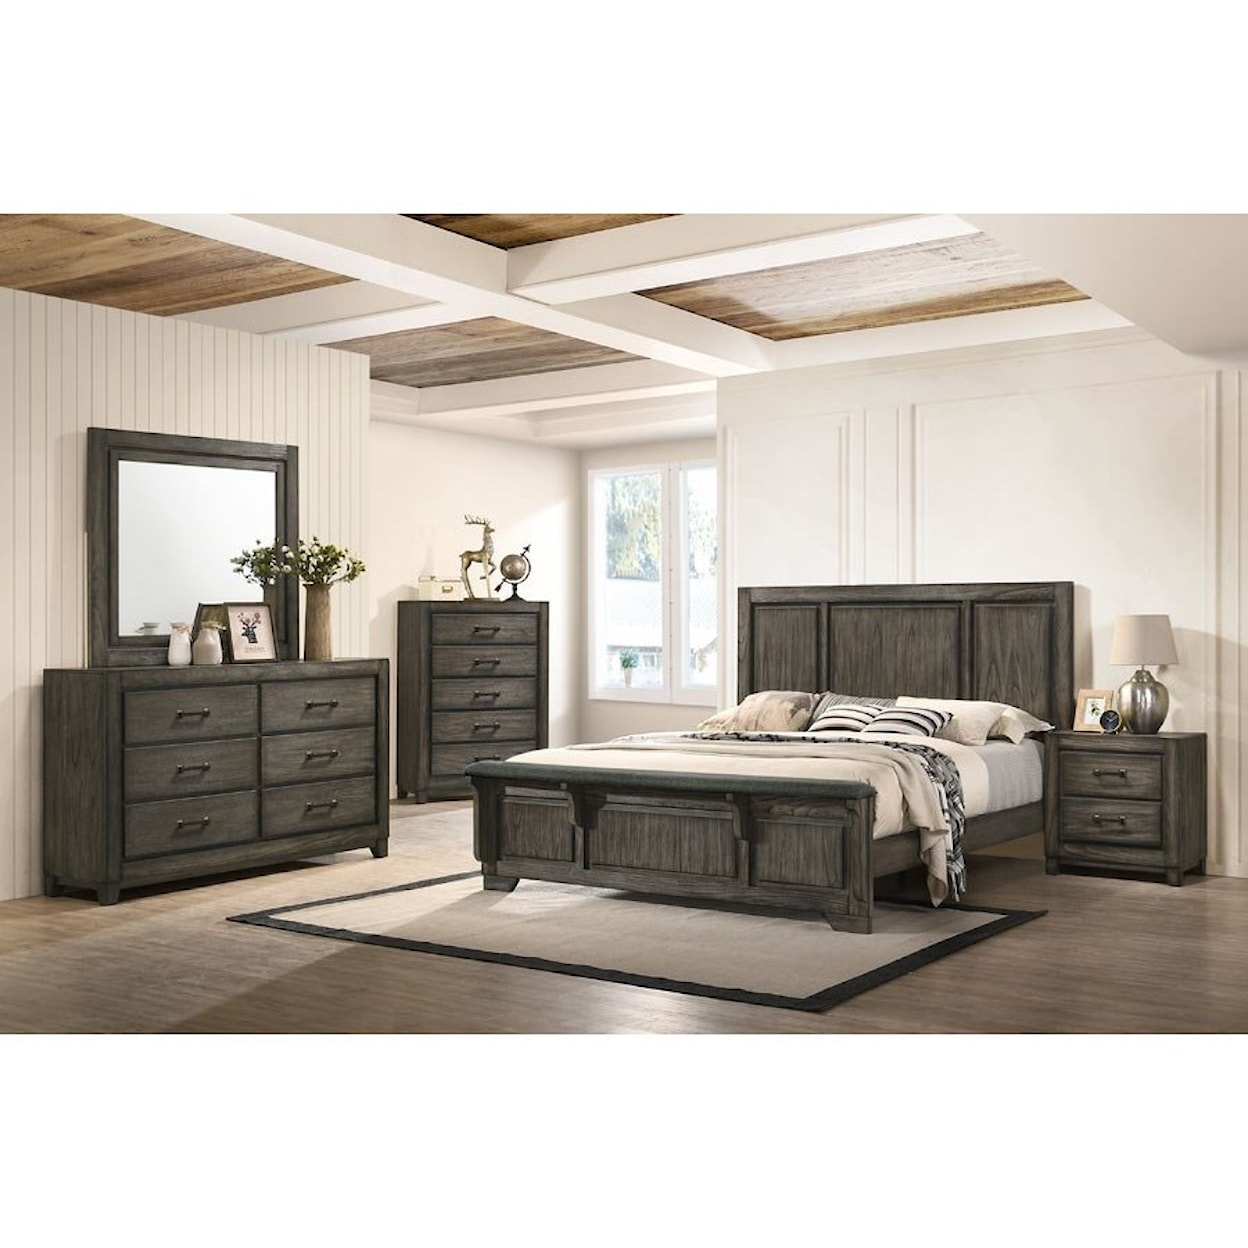 New Classic Furniture Ashland Twin Bedroom Group